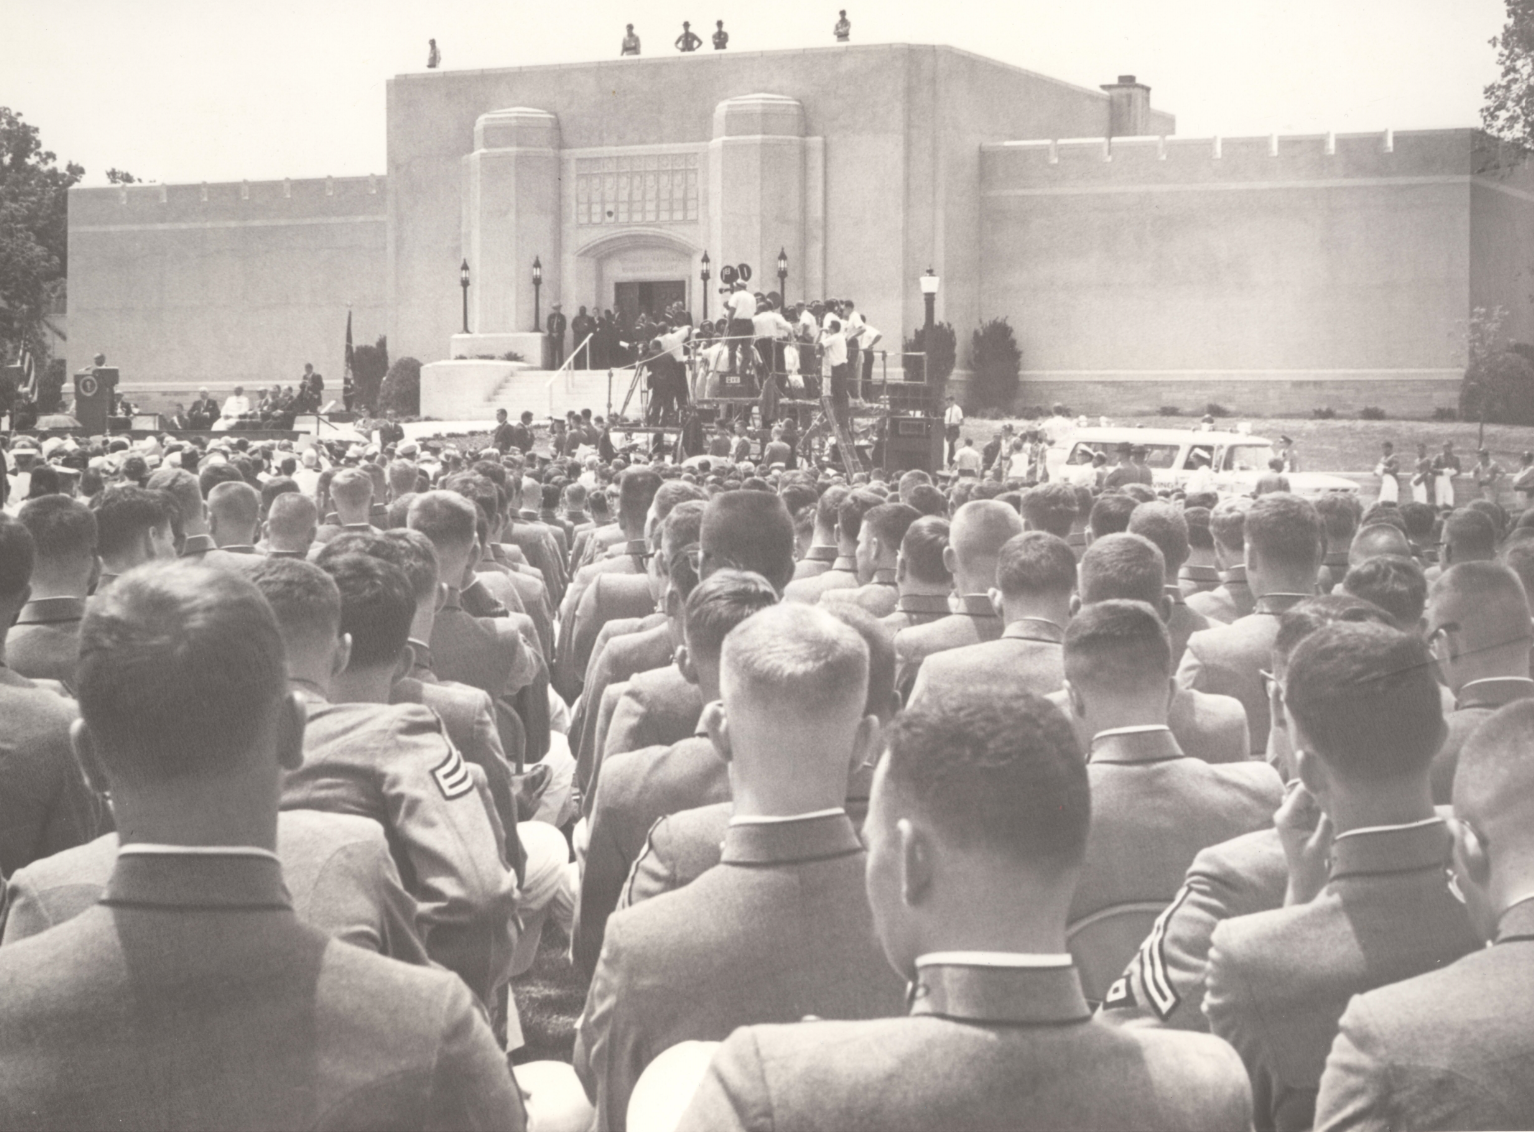 VMI cadets watching the dedication ceremonies, May 23, 1964, GCMF Photo.